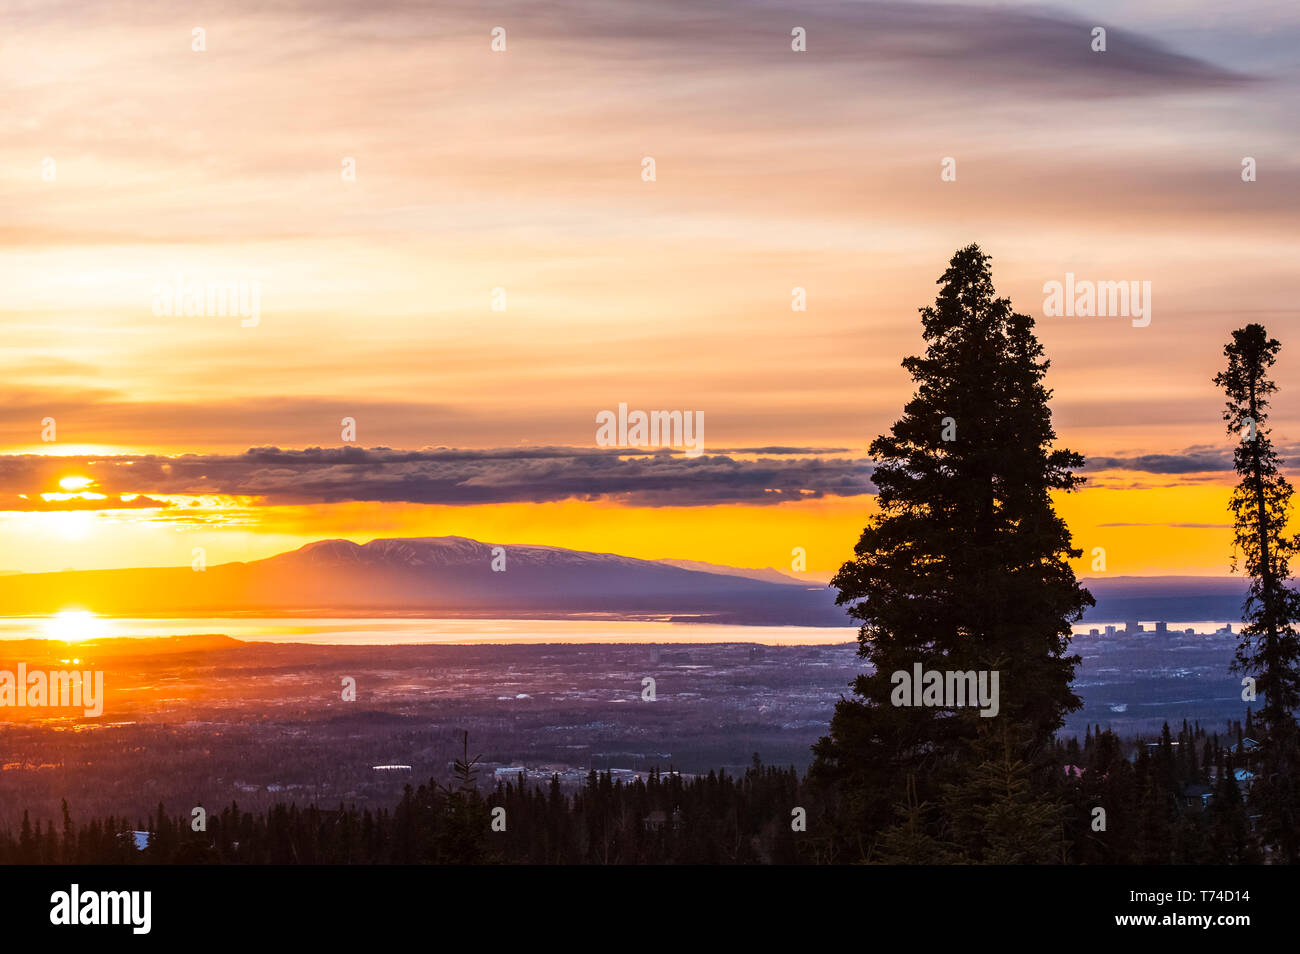 The setting sun over Alaska's Mount Susitna, locally known as 'The Sleeping Lady', with the Cook Inlet and the city of Anchorage in the foreground ... Stock Photo